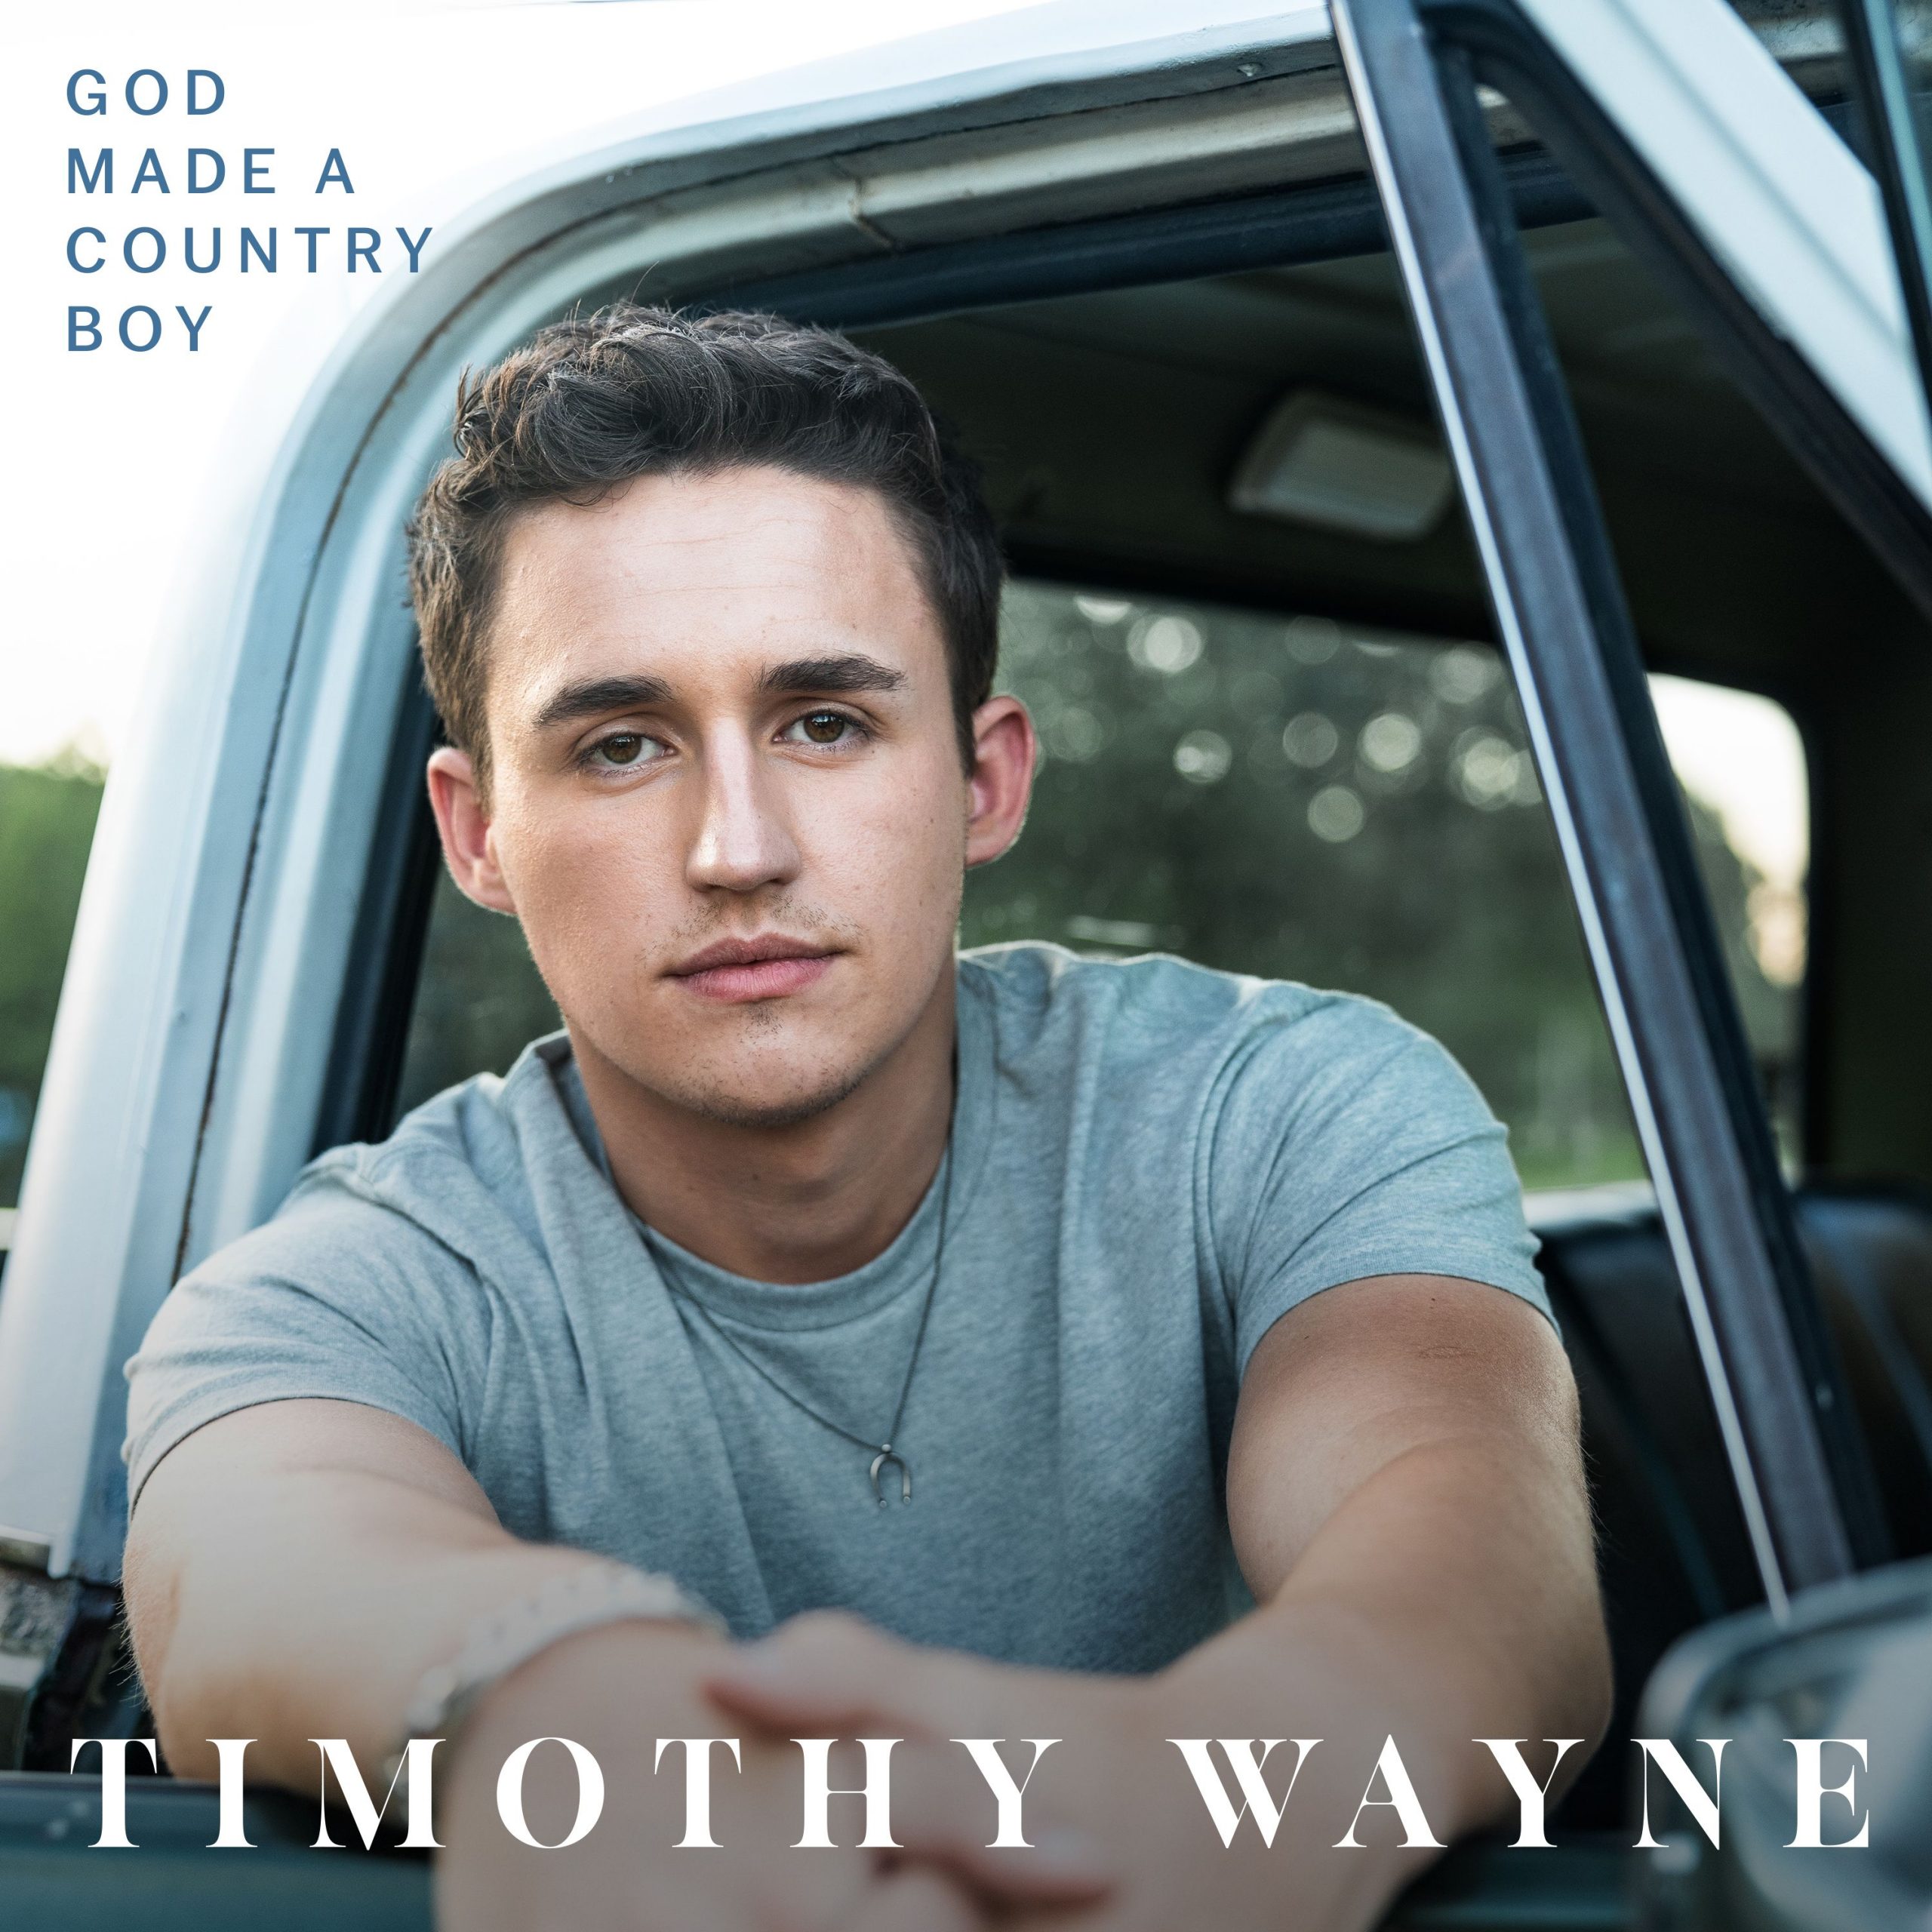 TIMOTHY WAYNE RELEASES DEBUT TRACK “GOD MADE A COUNTRY BOY”